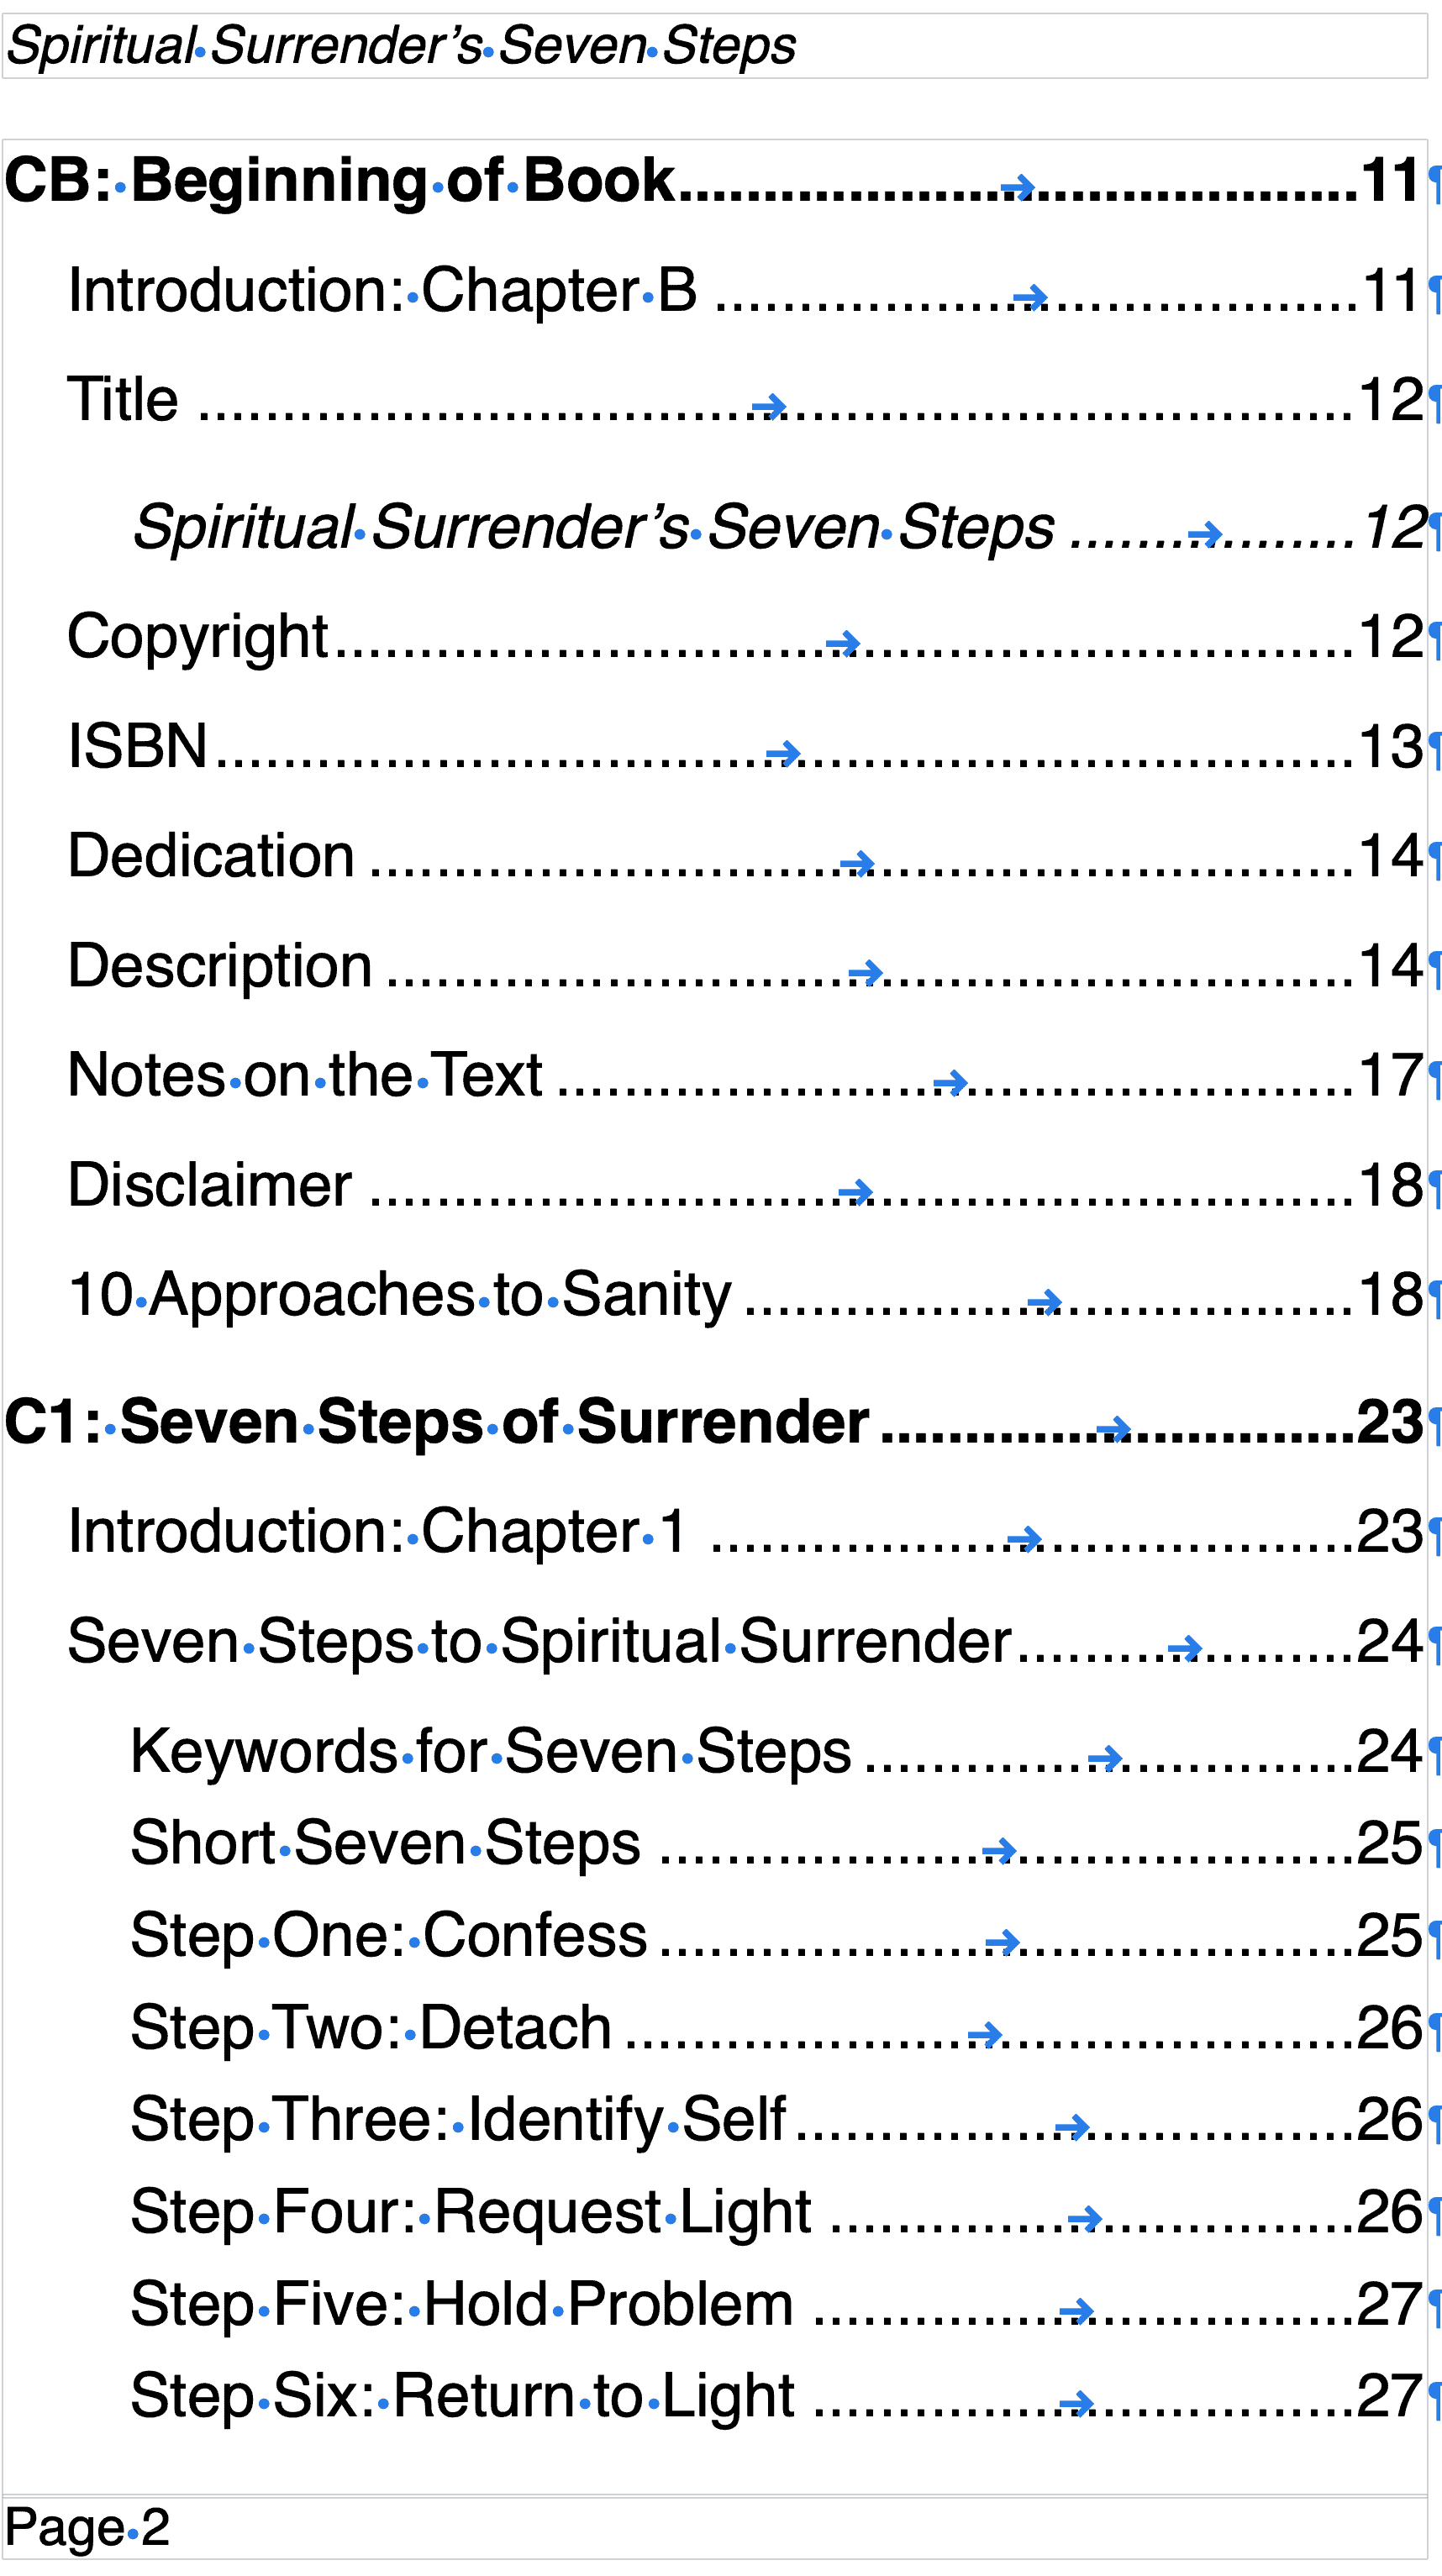 Contents for "Spiritual Surrender's Seven Steps" page 2